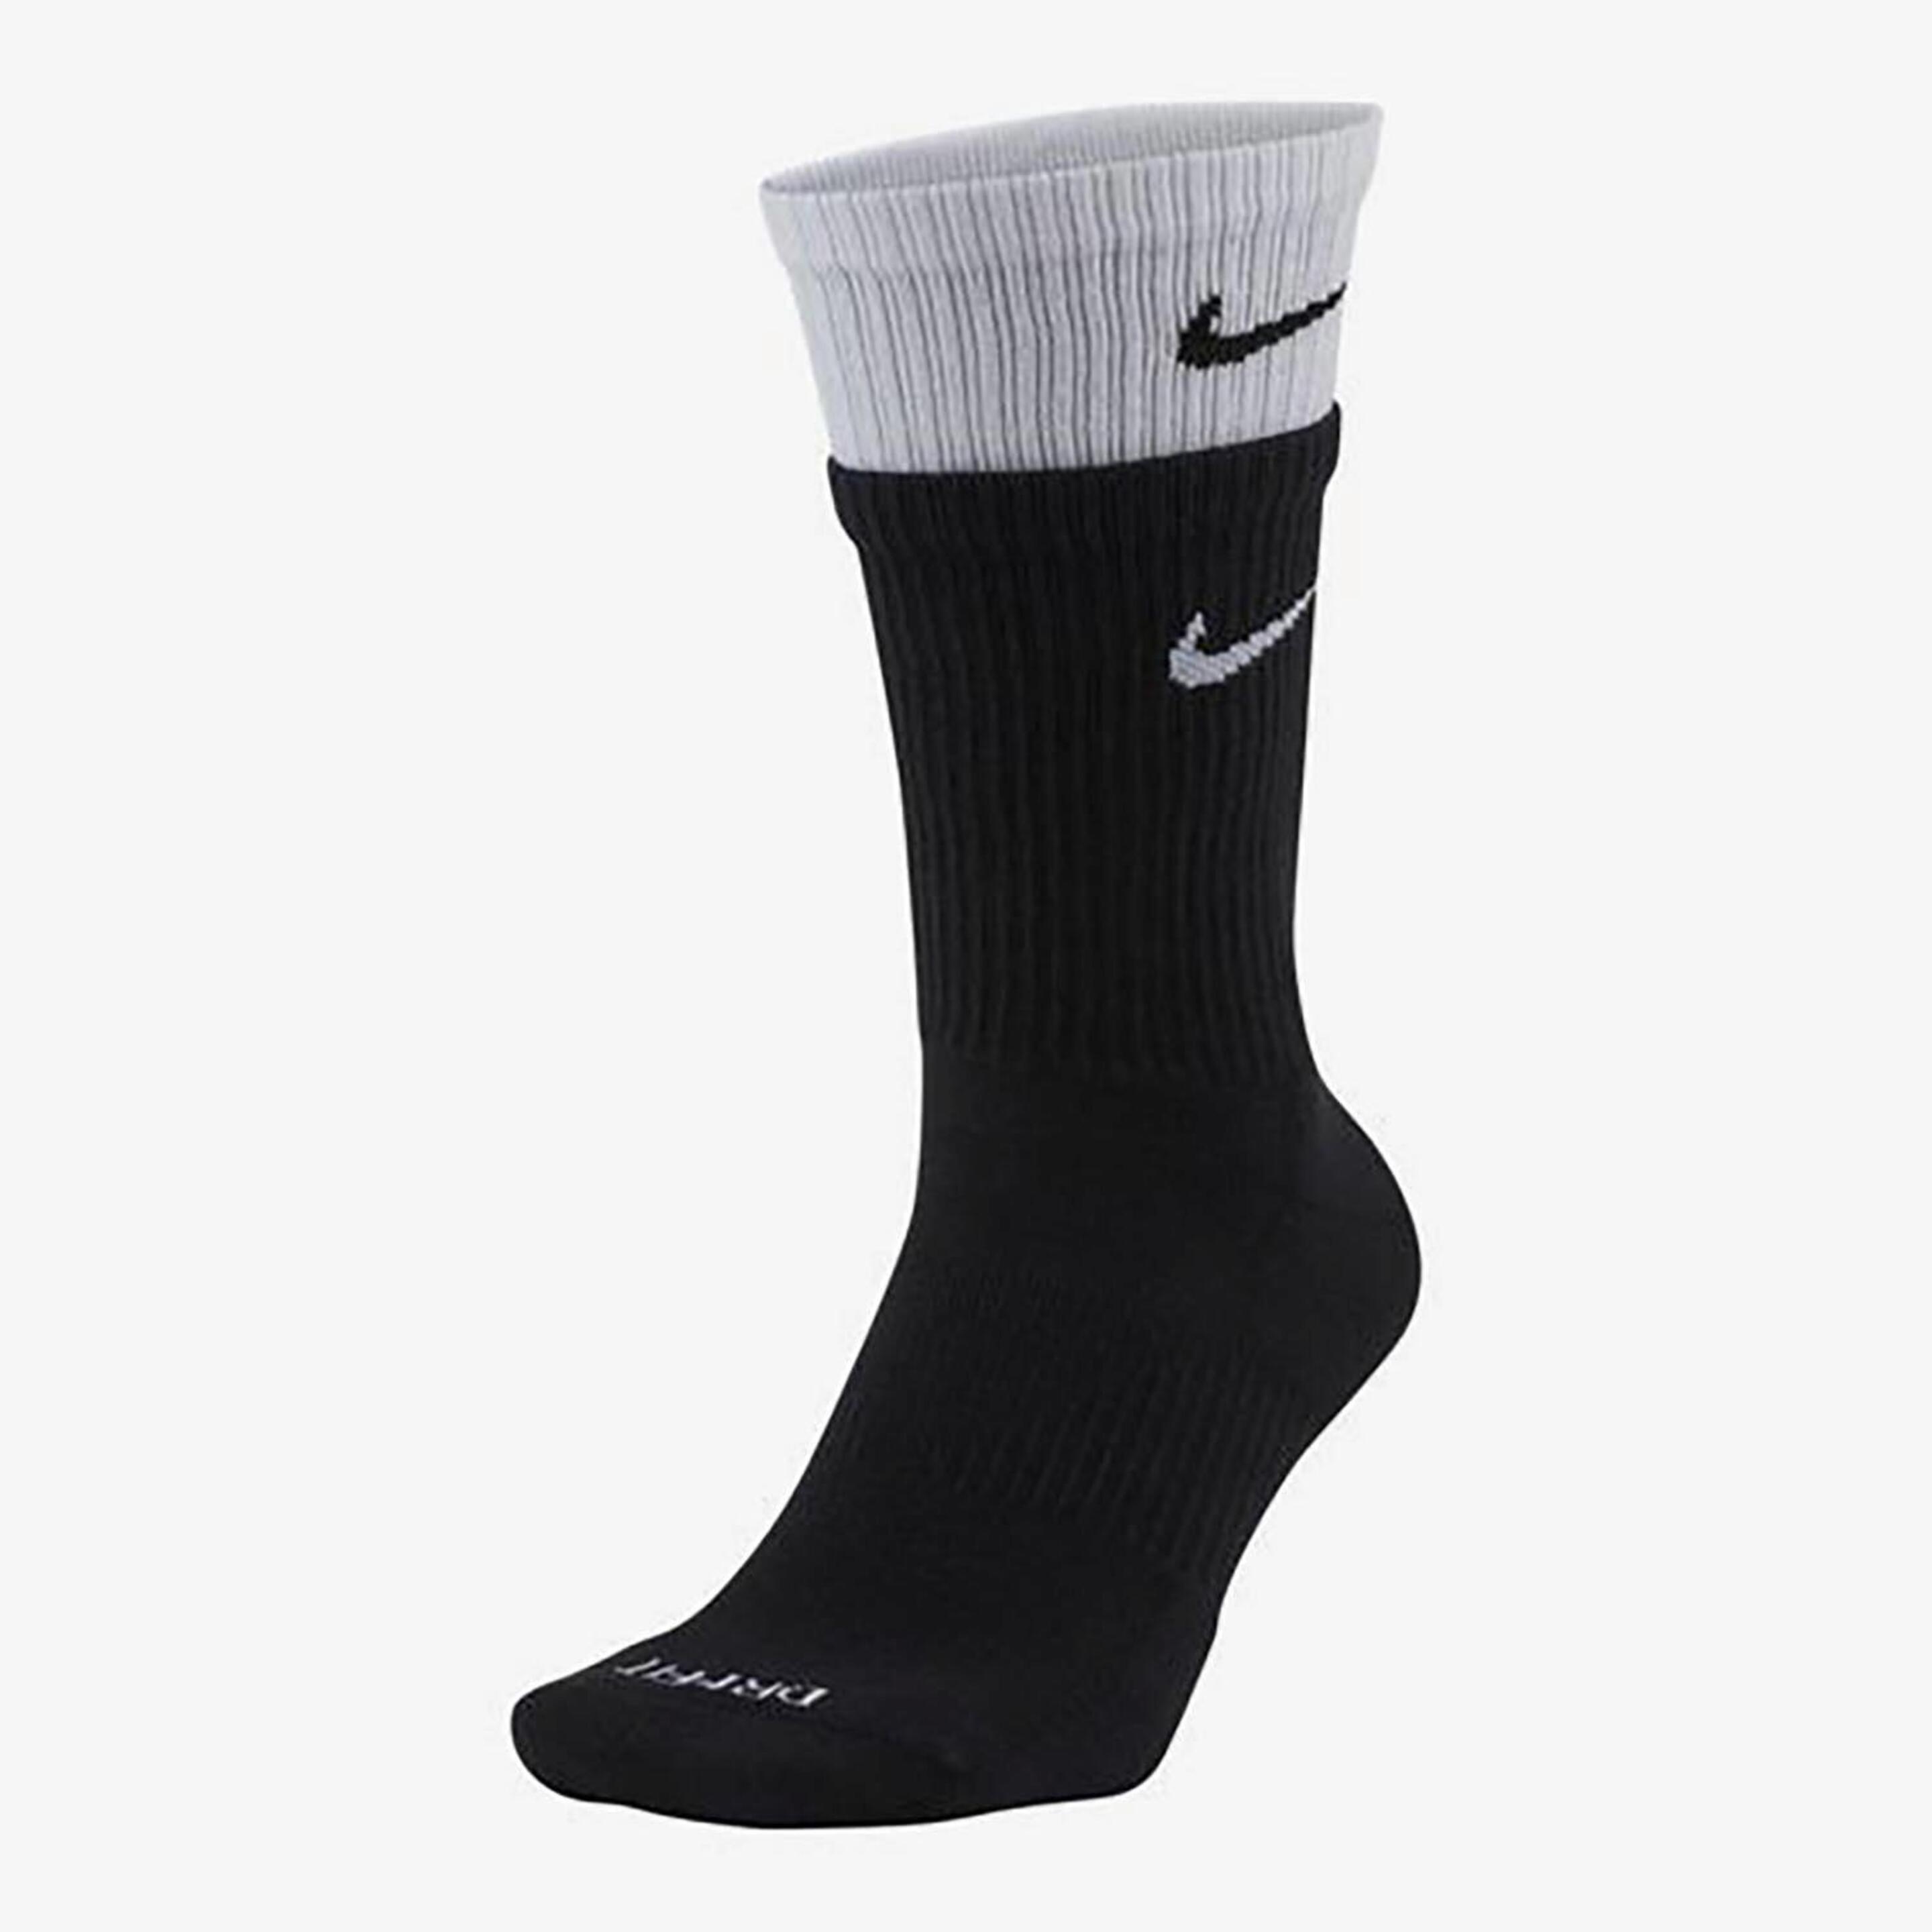 Nike Everyday Plus - blanco - Calcetines Hombre